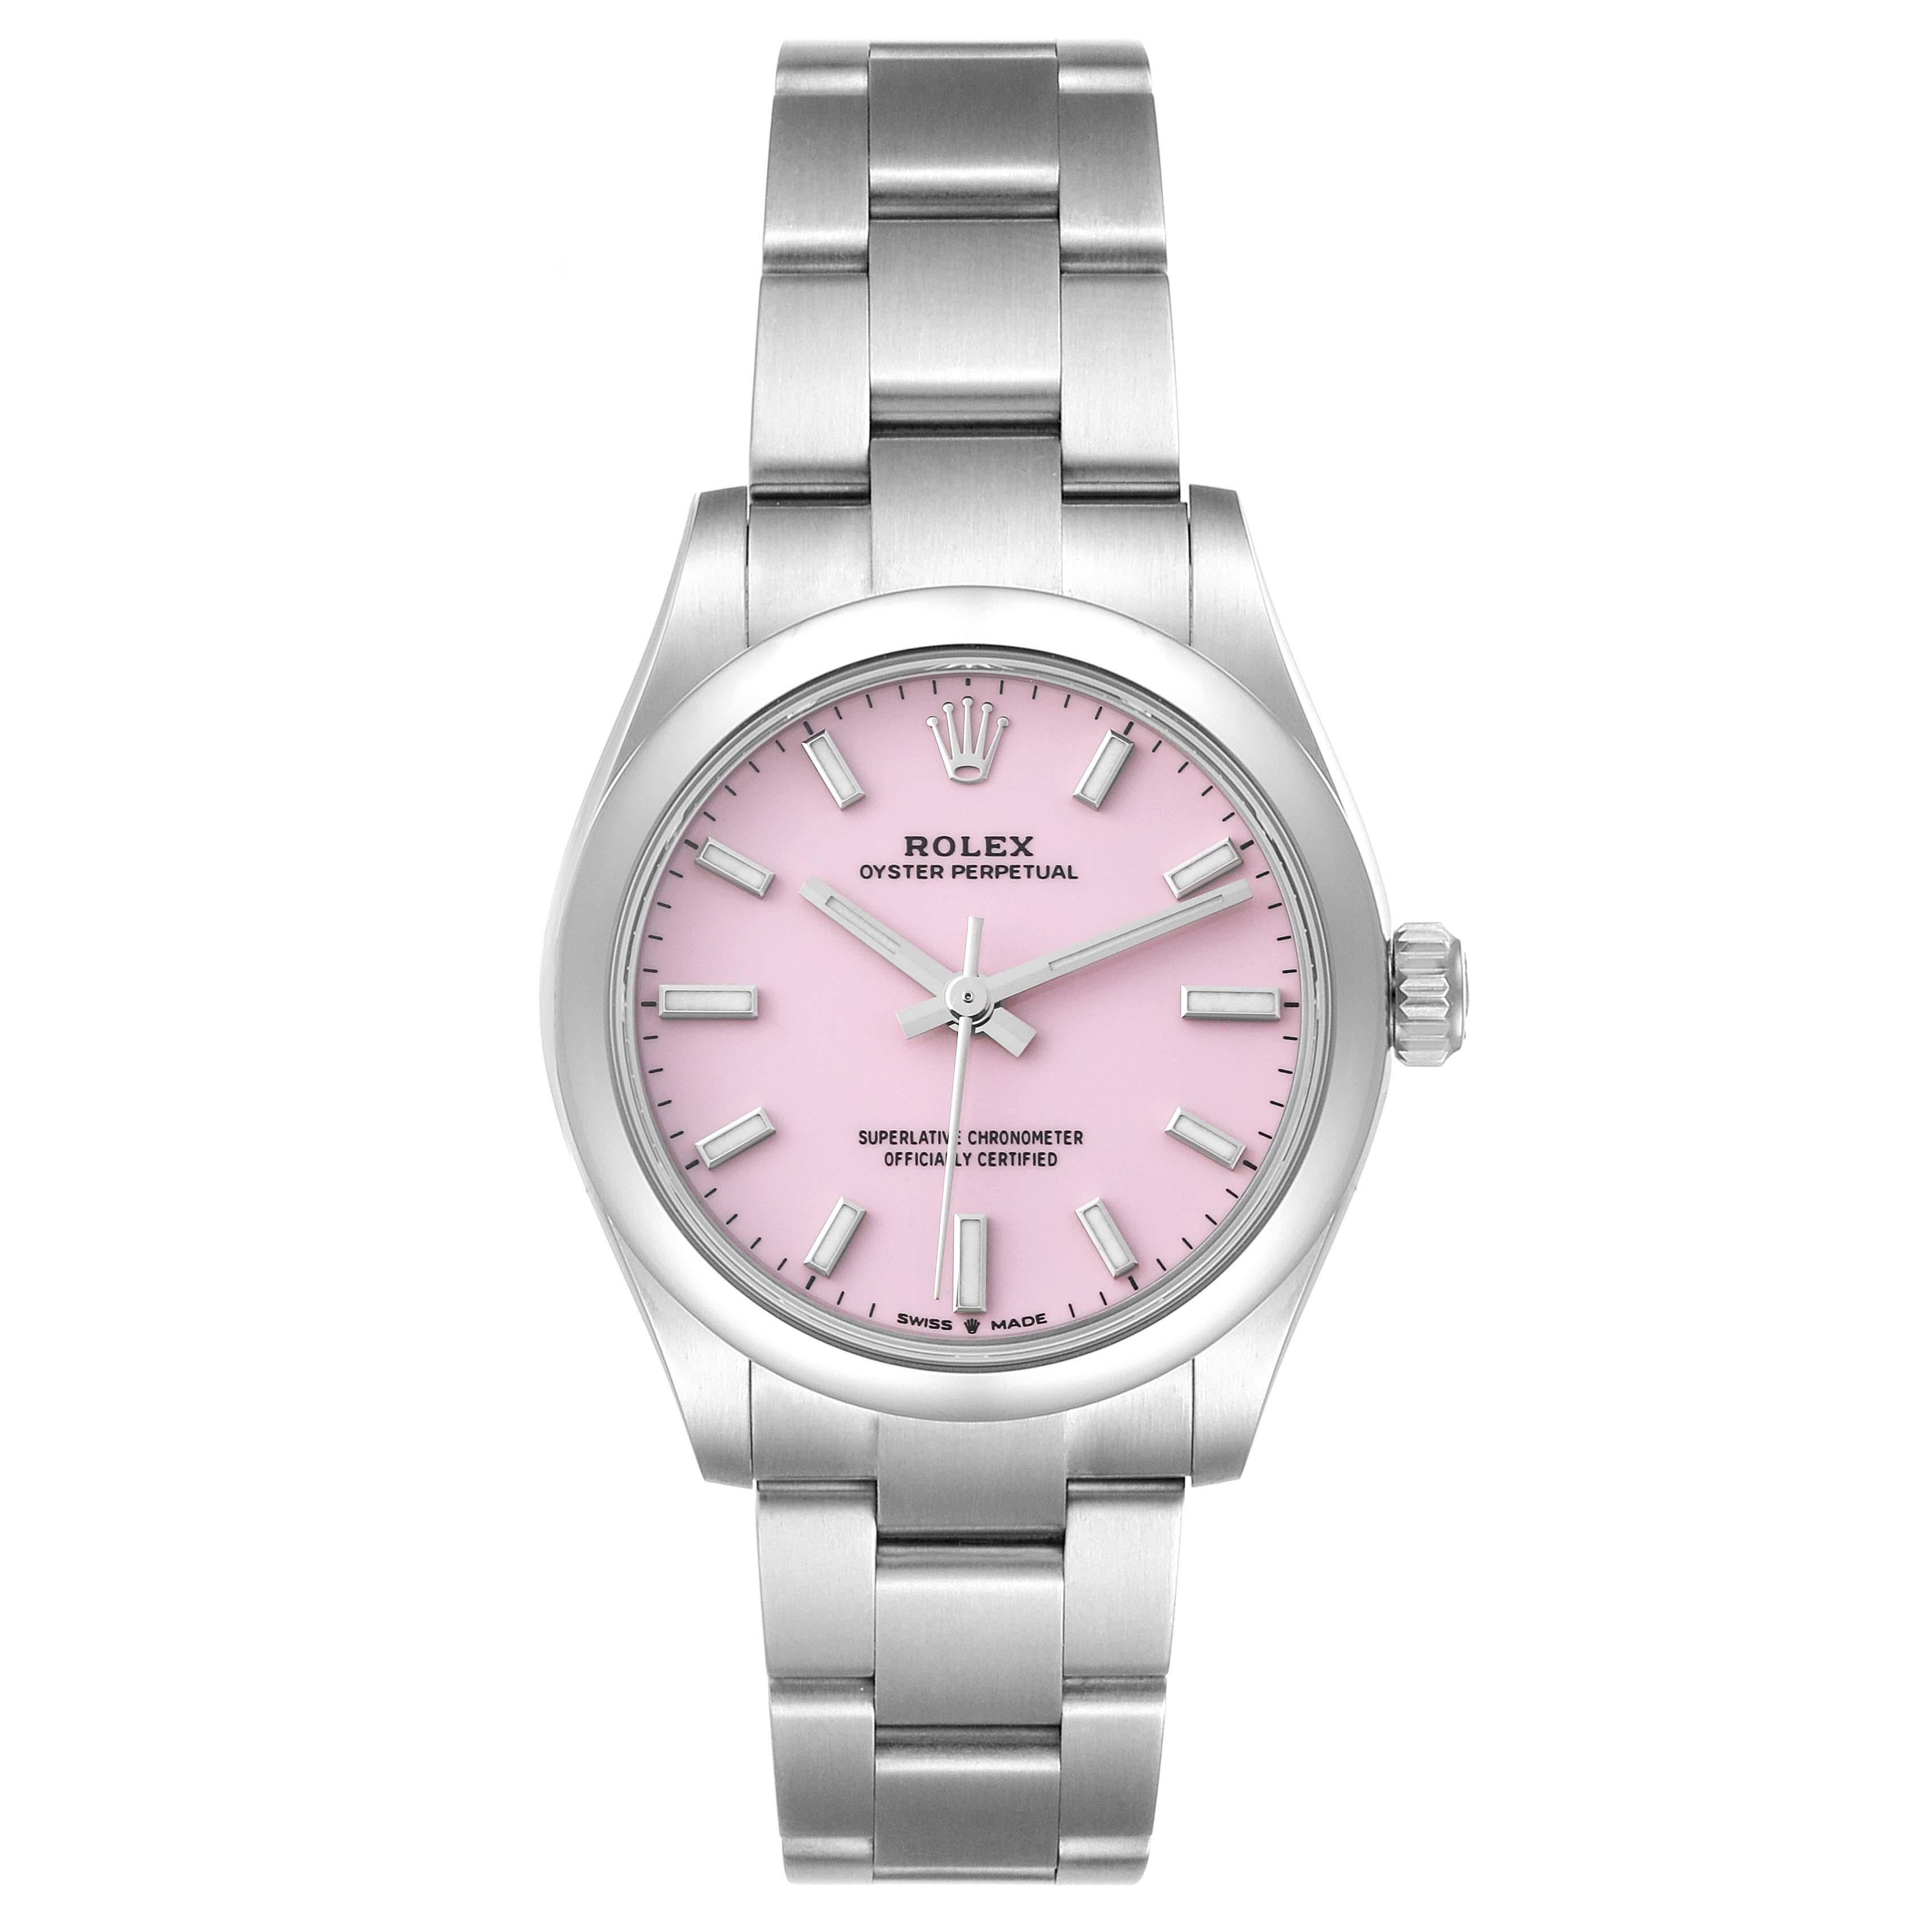 Rolex Oyster Perpetual Midsize Candy Pink Dial Steel Ladies Watch 277200. Automatic self-winding movement. Stainless steel oyster case 31.0 mm in diameter. Rolex logo on a crown. Stainless steel smooth bezel. Scratch resistant sapphire crystal.